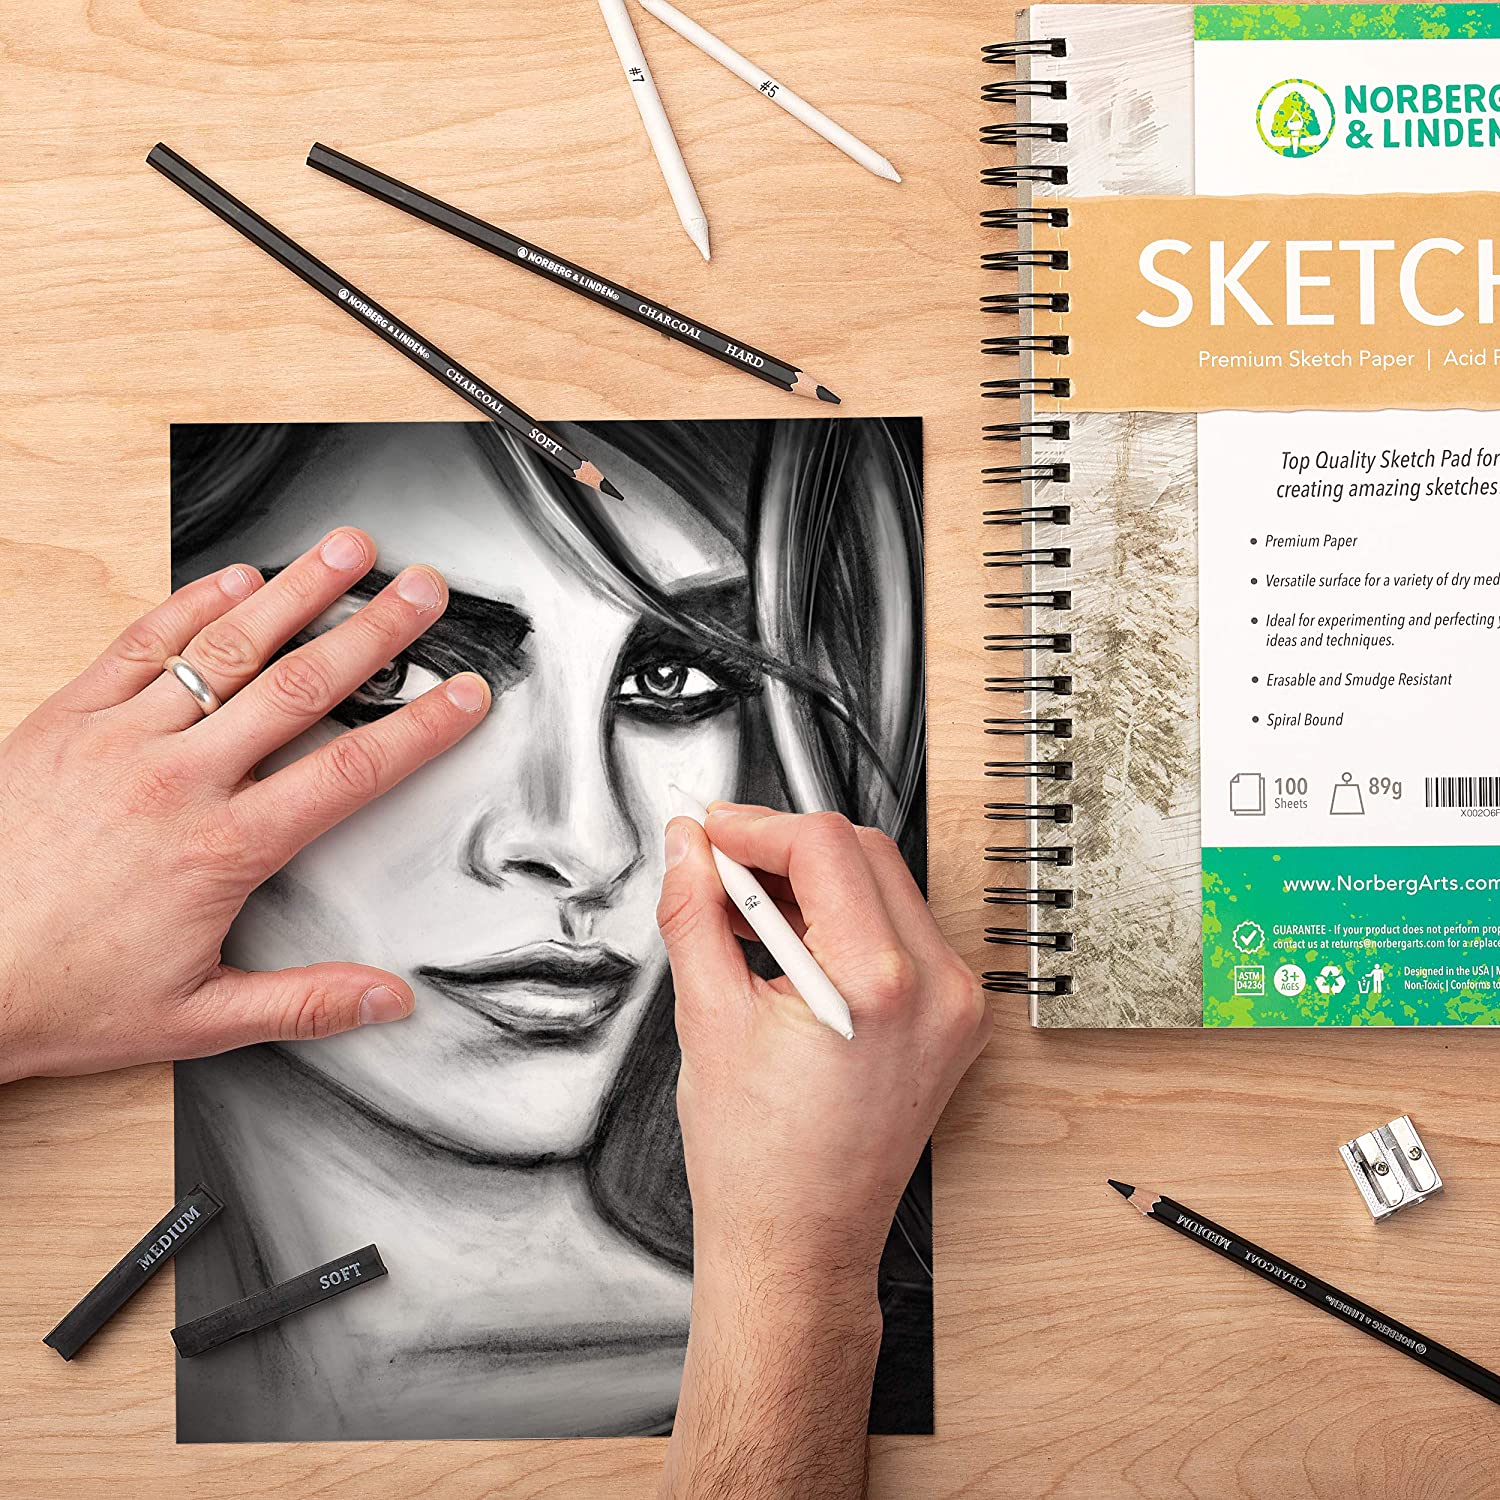 Canson Artist Series Universal Sketch Paper Wirebound Pad 18x24 inches  35 Sheets 65lb96g  Artist Paper for Adults and Students  Graphite  Charcoal Pencil Colored Pencil  Amazonin Home  Kitchen